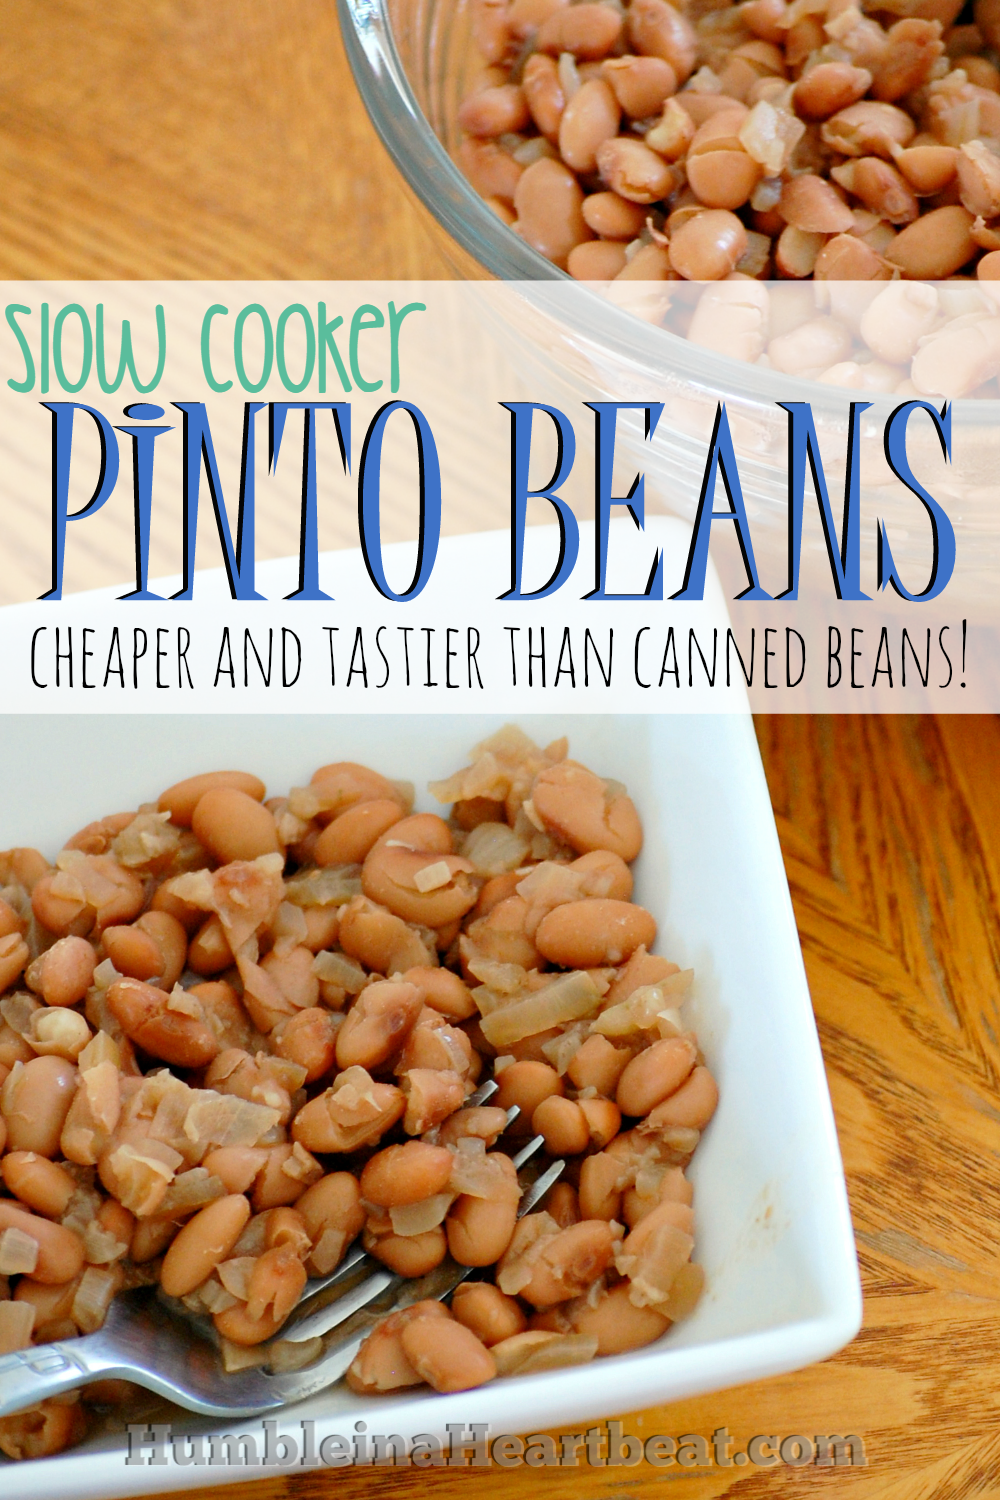 You have to make these slow cooker pinto beans. They're super versatile, tasty, and much cheaper than buying a can from the store!